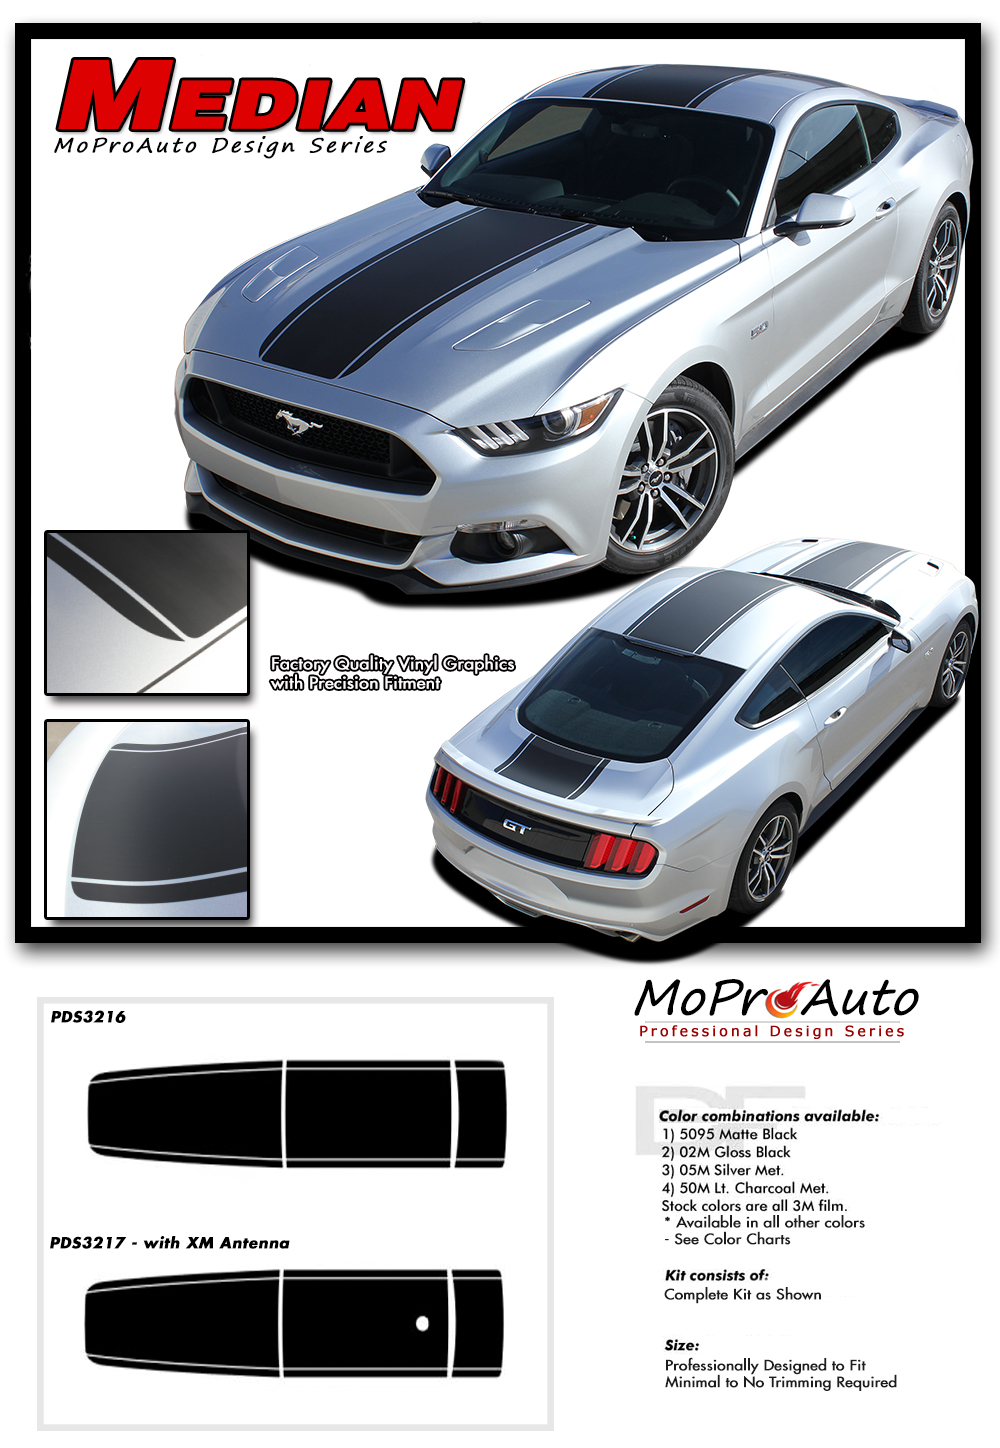 2015 2016 2017 Median OEM Style Racing Stripes for Ford Mustang - MoProAuto Pro Design Series Vinyl Graphics, Stripes and Decals Kit